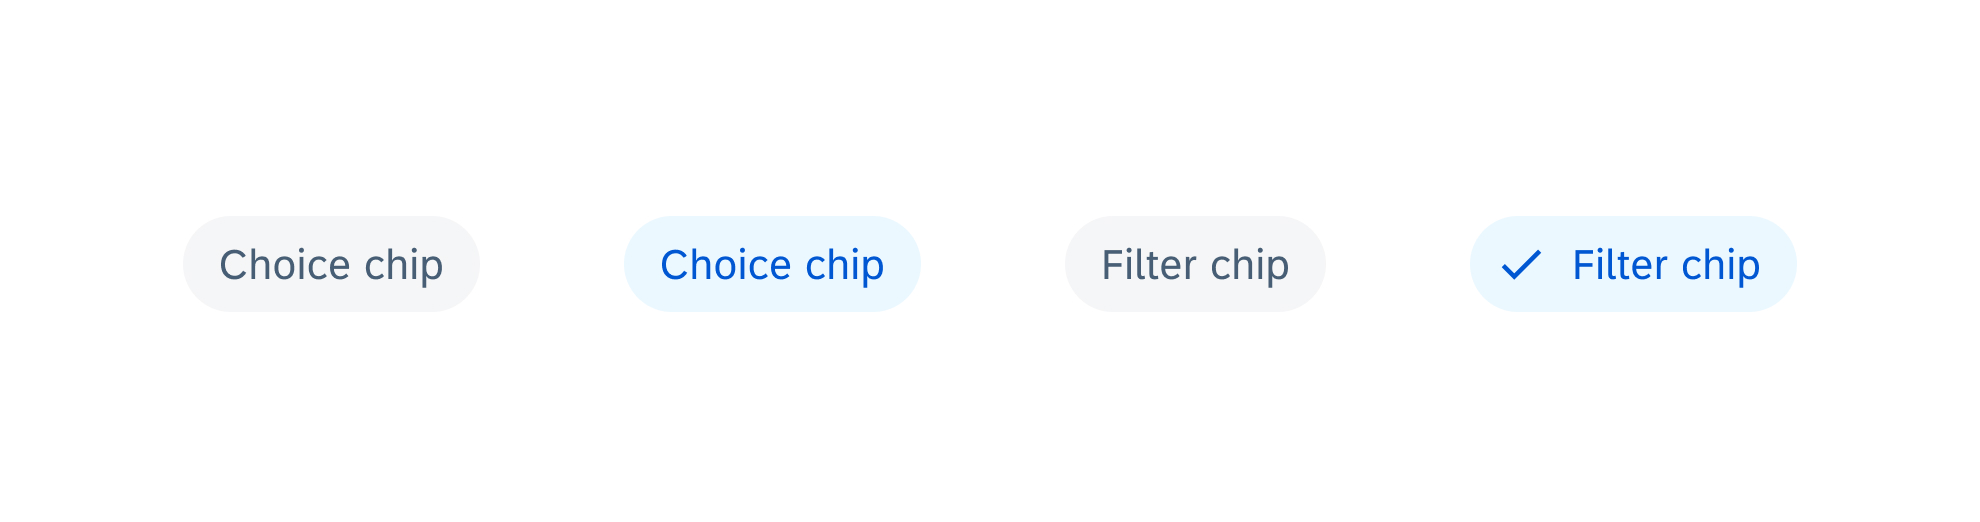 Choice chips and filter chips